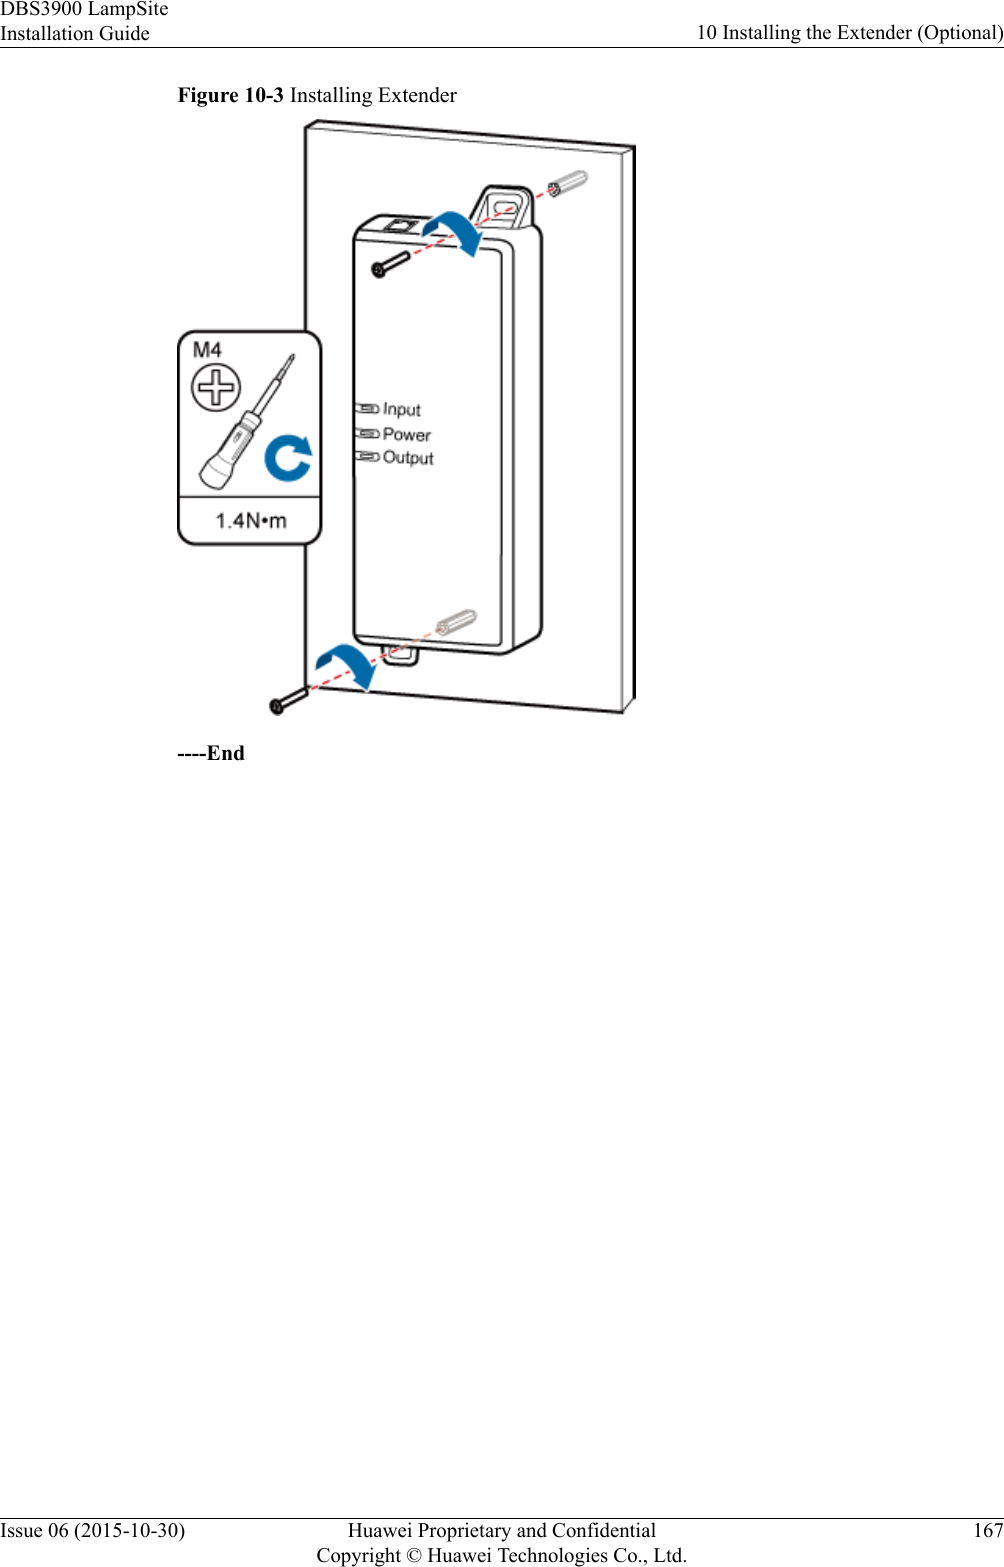 Figure 10-3 Installing Extender----EndDBS3900 LampSiteInstallation Guide 10 Installing the Extender (Optional)Issue 06 (2015-10-30) Huawei Proprietary and ConfidentialCopyright © Huawei Technologies Co., Ltd.167